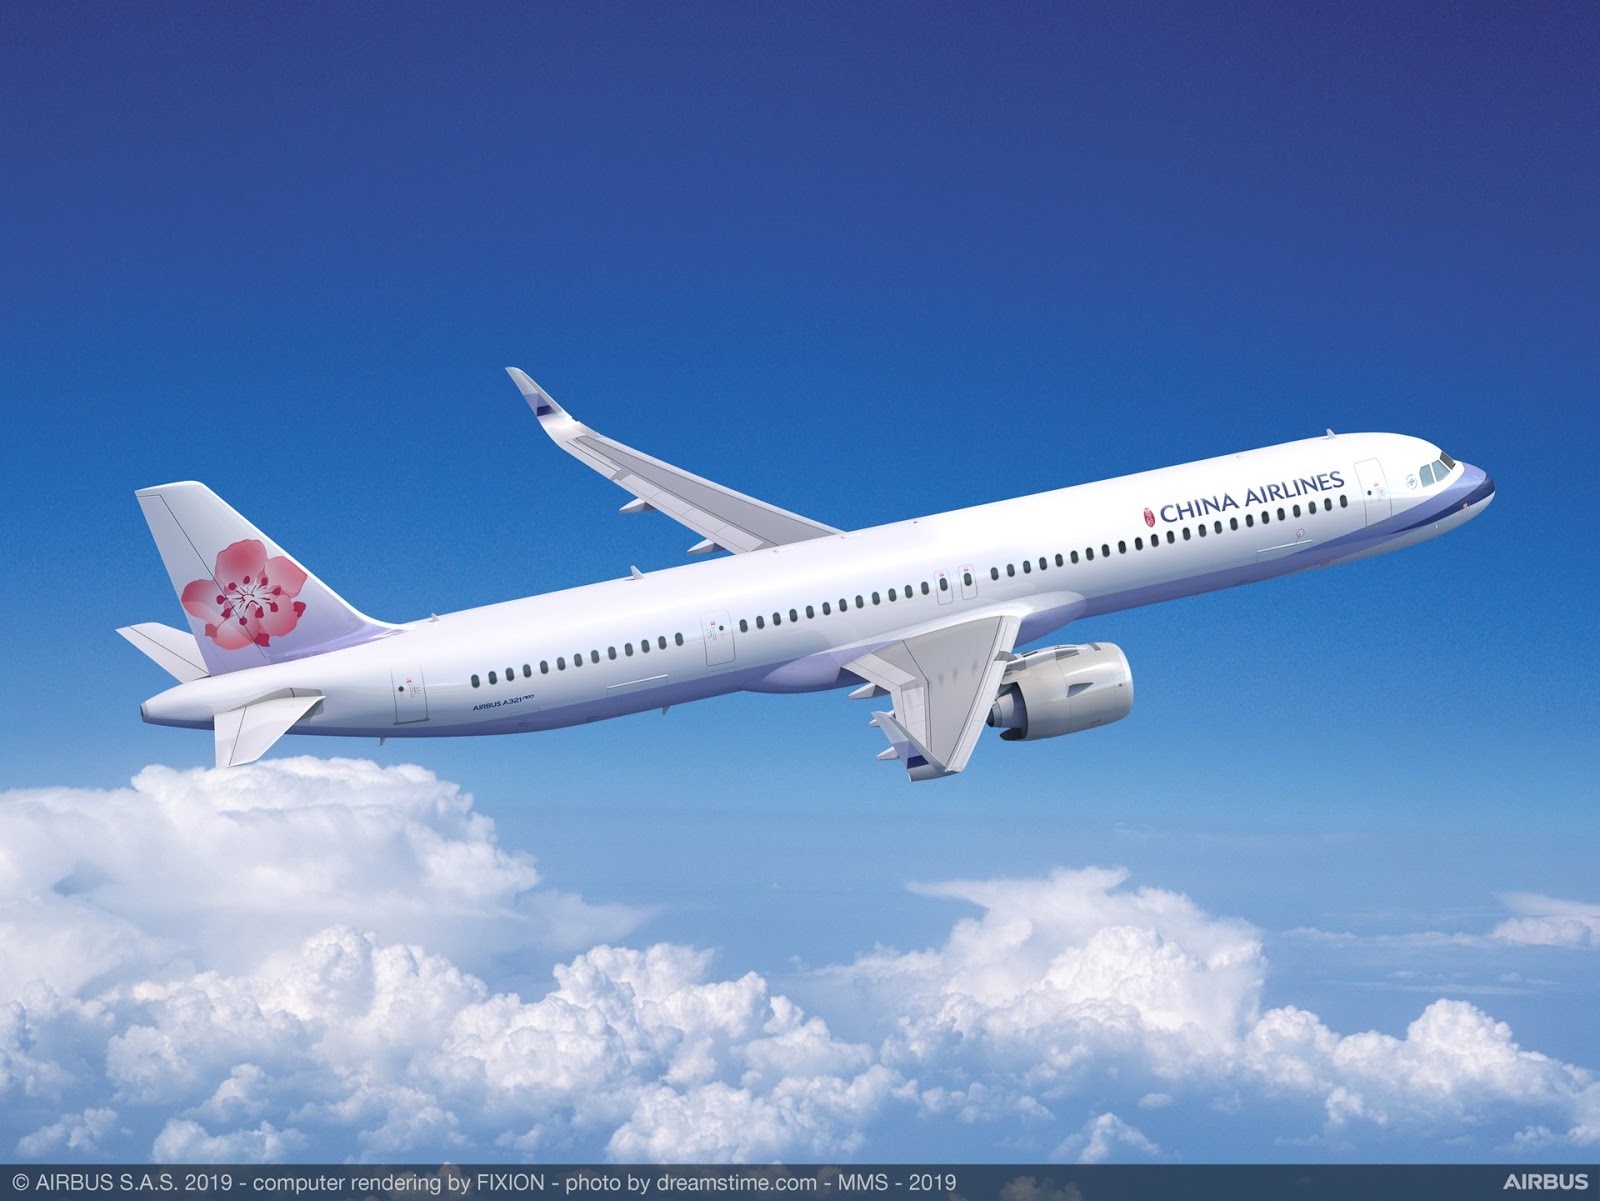 air101-china-airlines-selects-the-a321neo-for-its-future-single-aisle